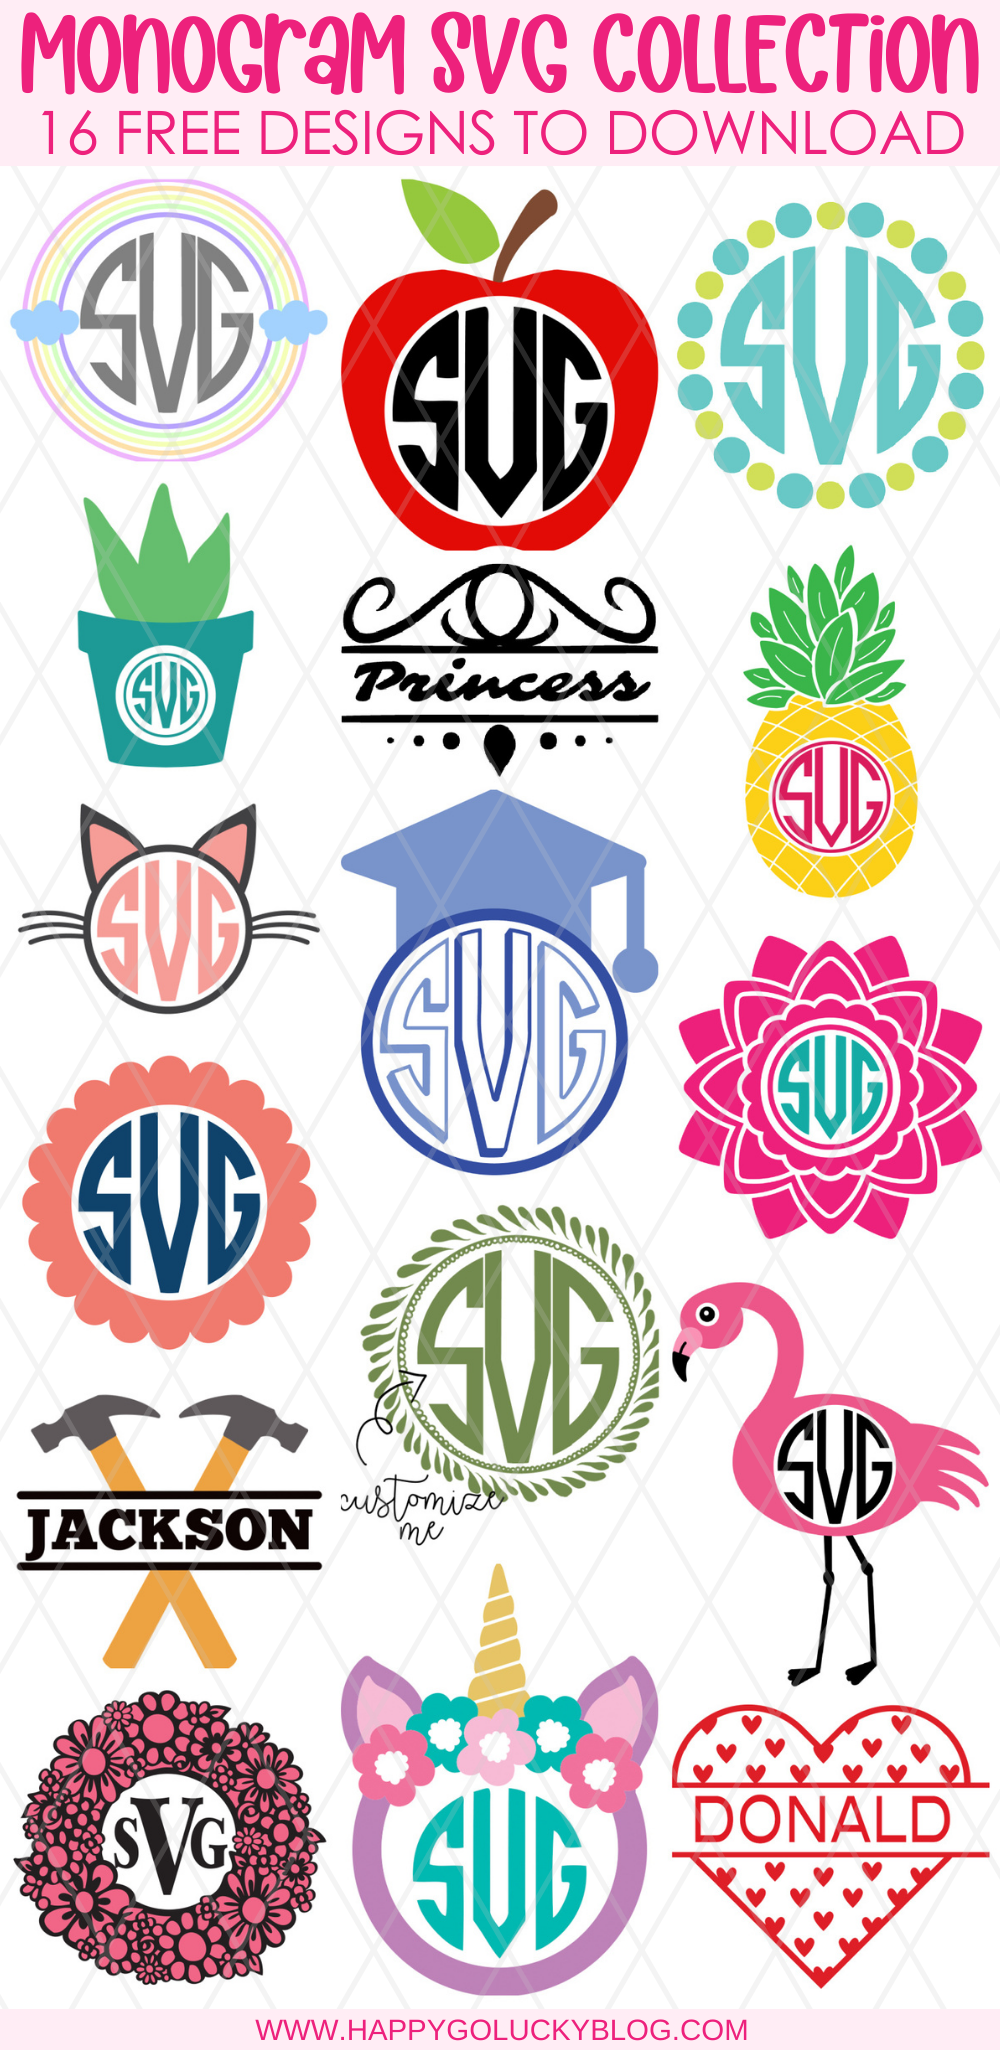 Download Free Monogram Svg Cut Files To Make Personalized Gifts